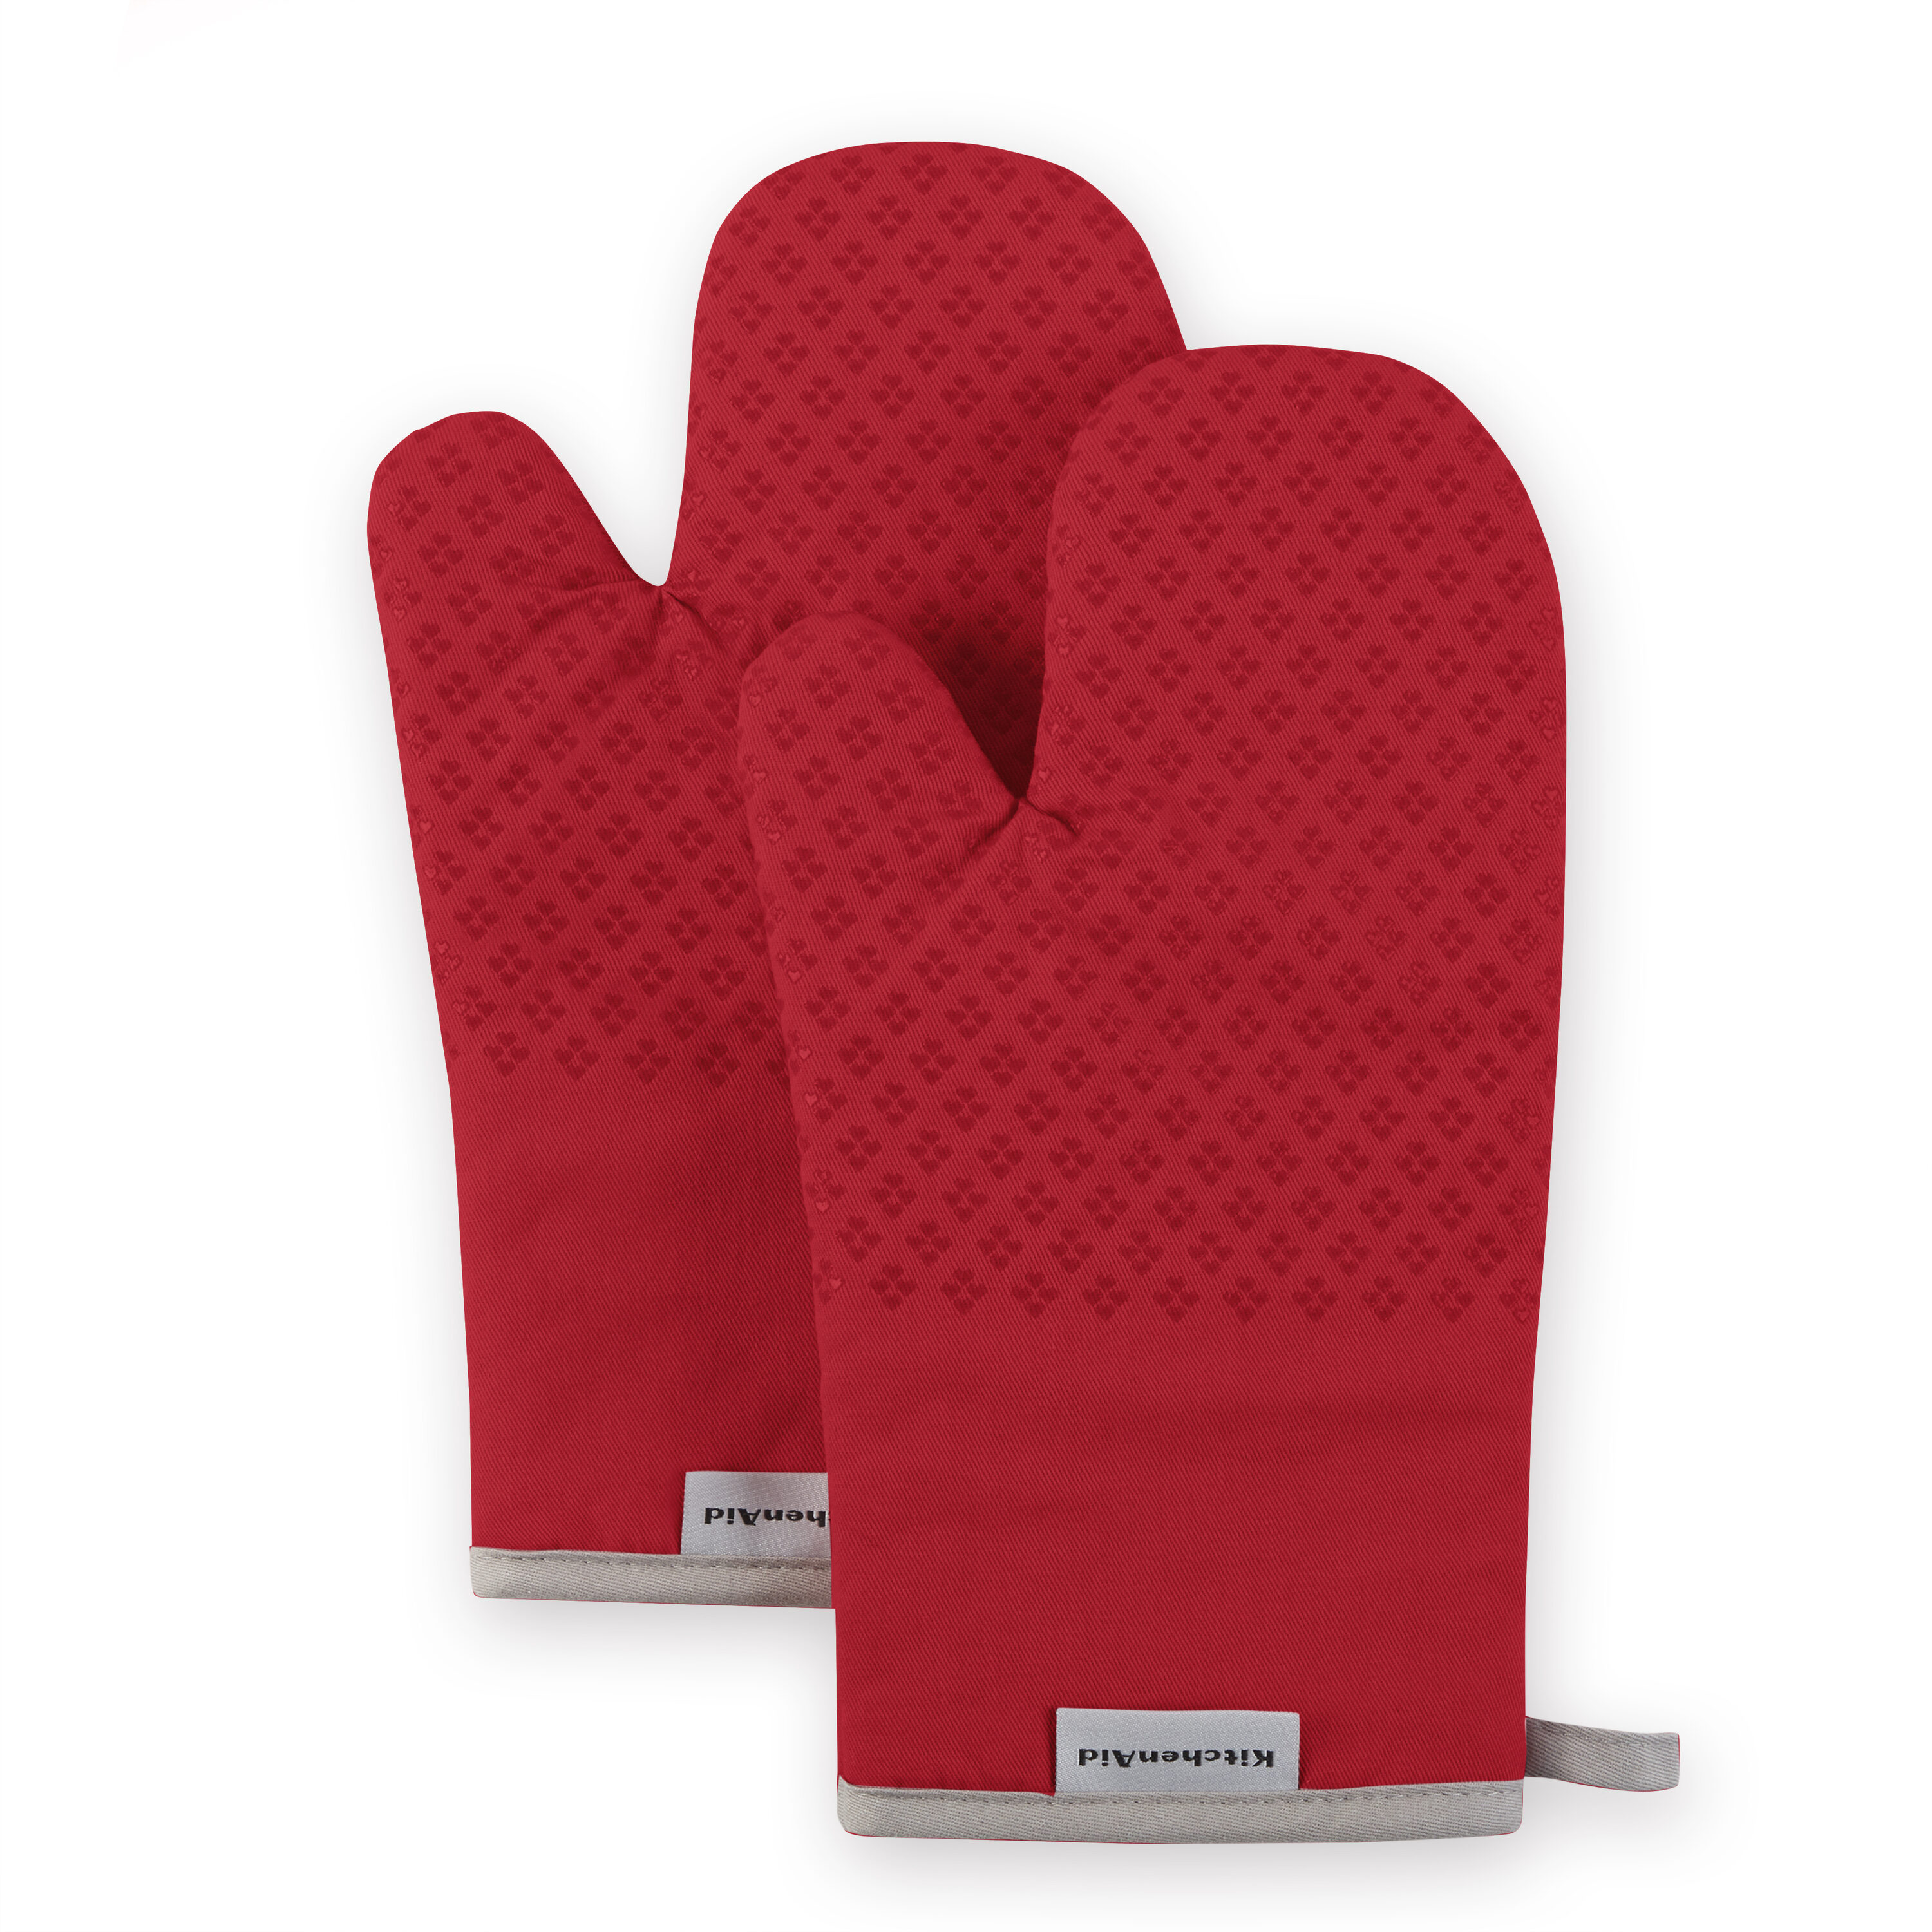 KitchenAid Ribbed Soft Silicone Oven Mitt Set, Passion Red, 7.5x13, Set  of 2